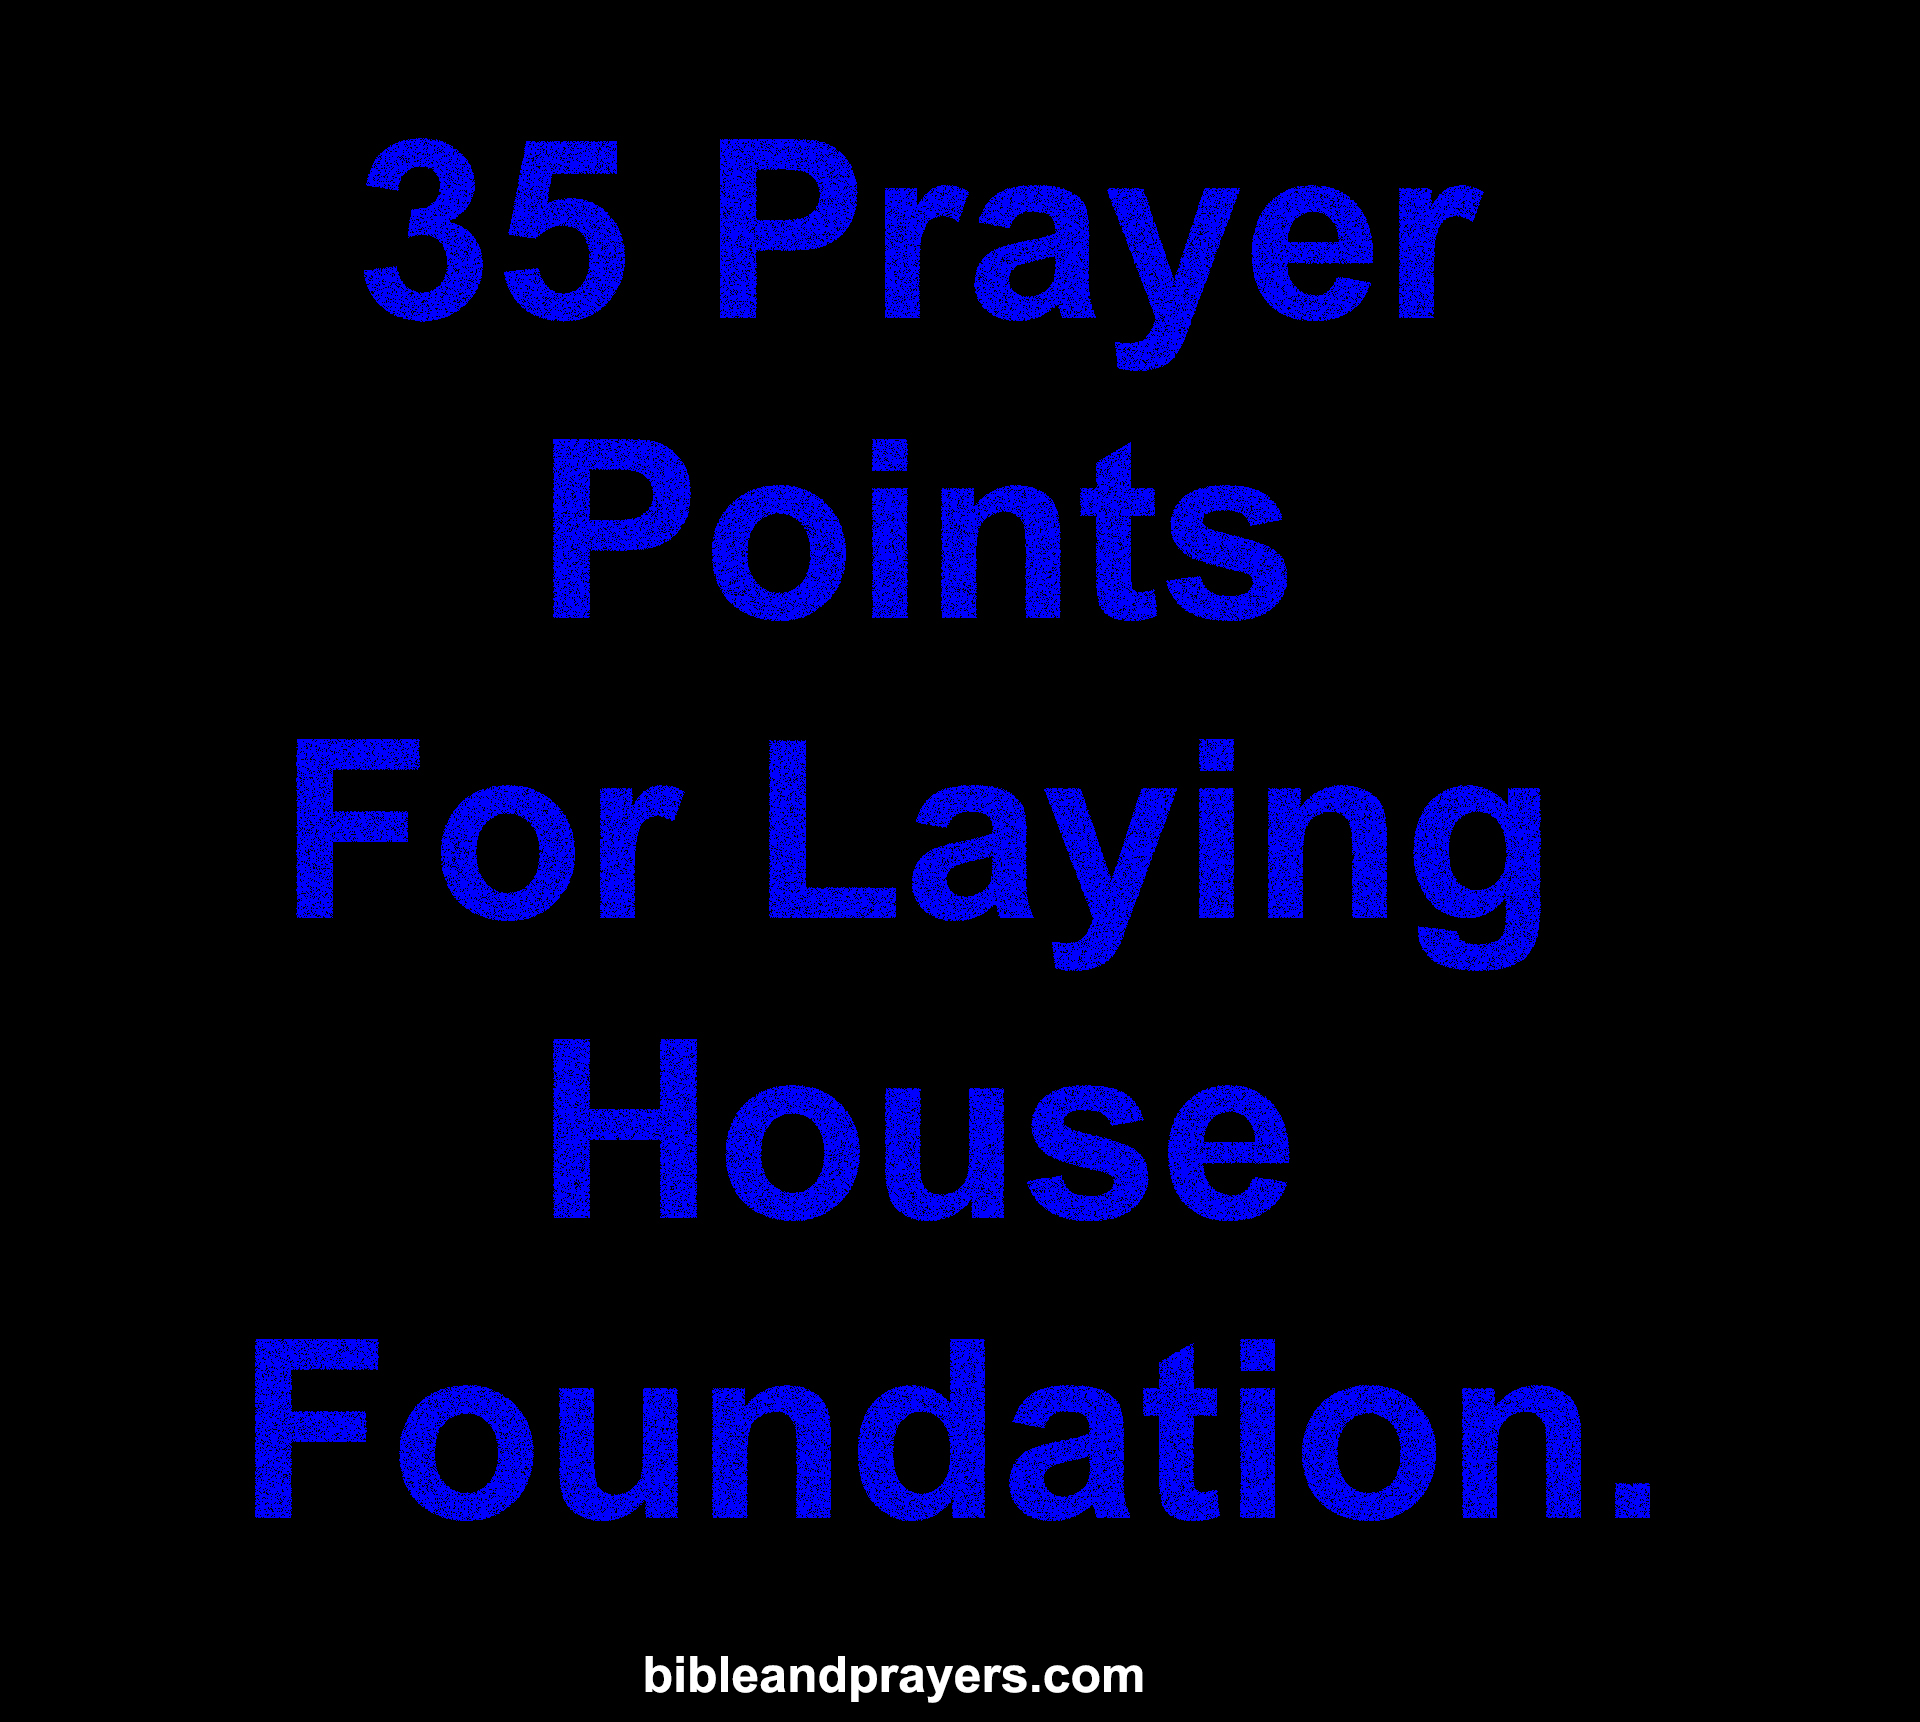 35 Prayer Points For Laying House Foundation.